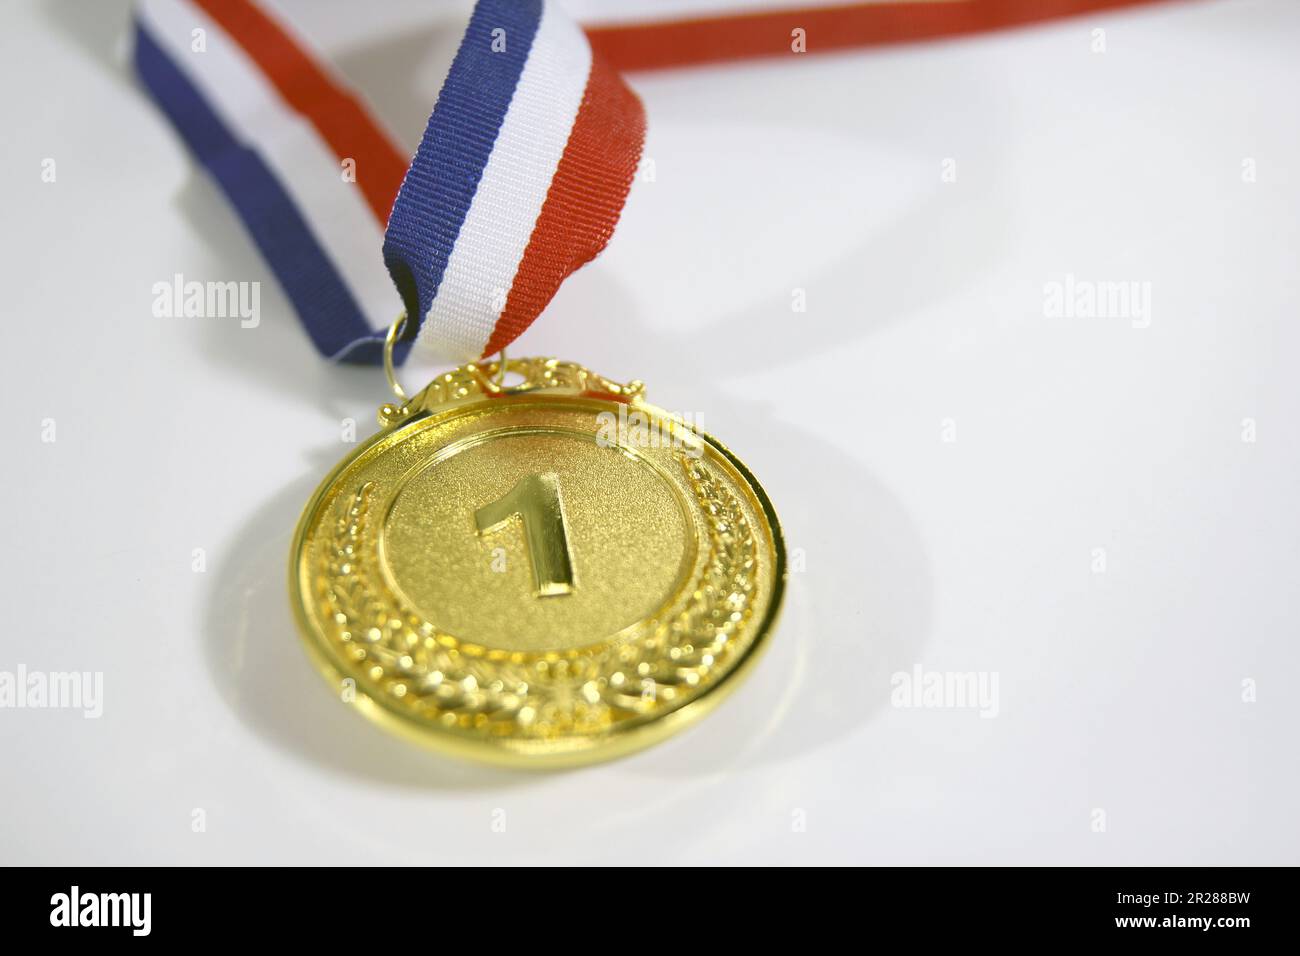 Gold medal 1 place with a ribbon on a light gray background, the concept of victory or success Stock Photo